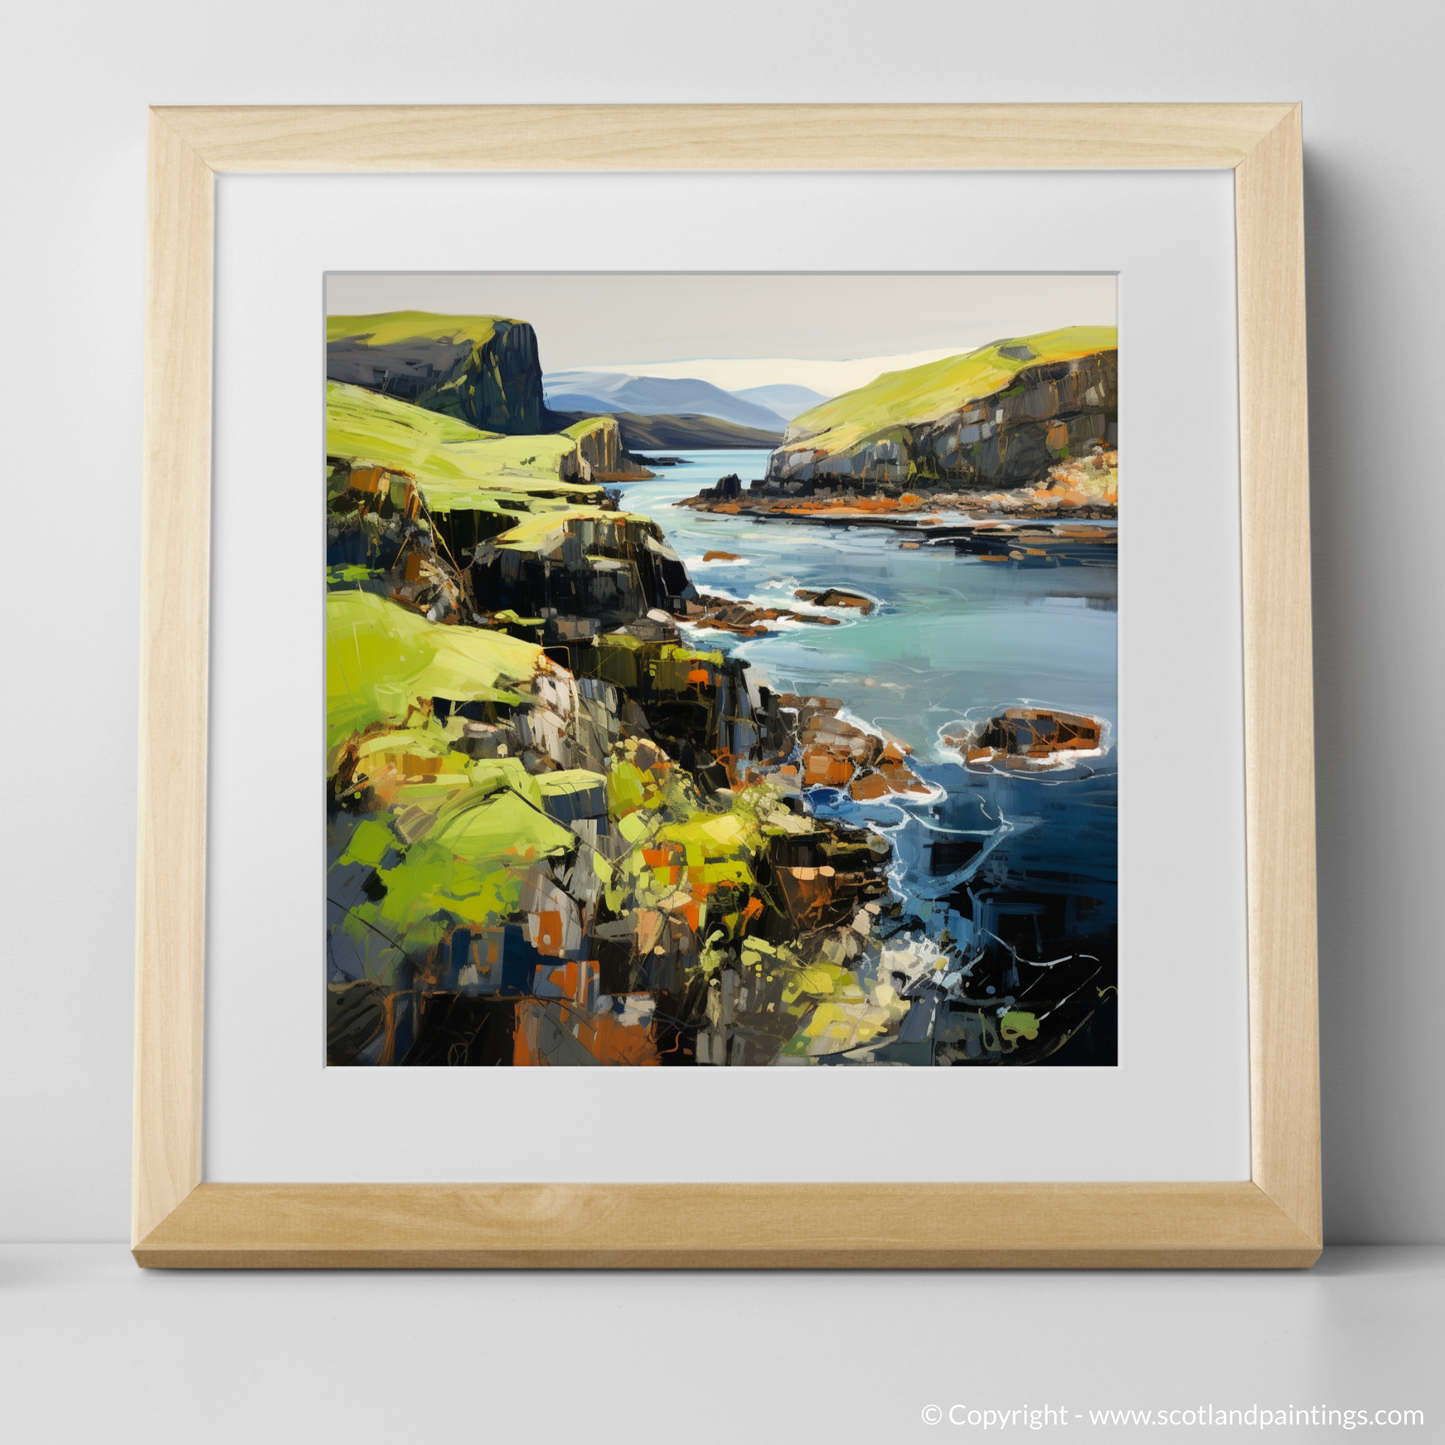 Art Print of Easdale Sound, Easdale, Argyll and Bute with a natural frame